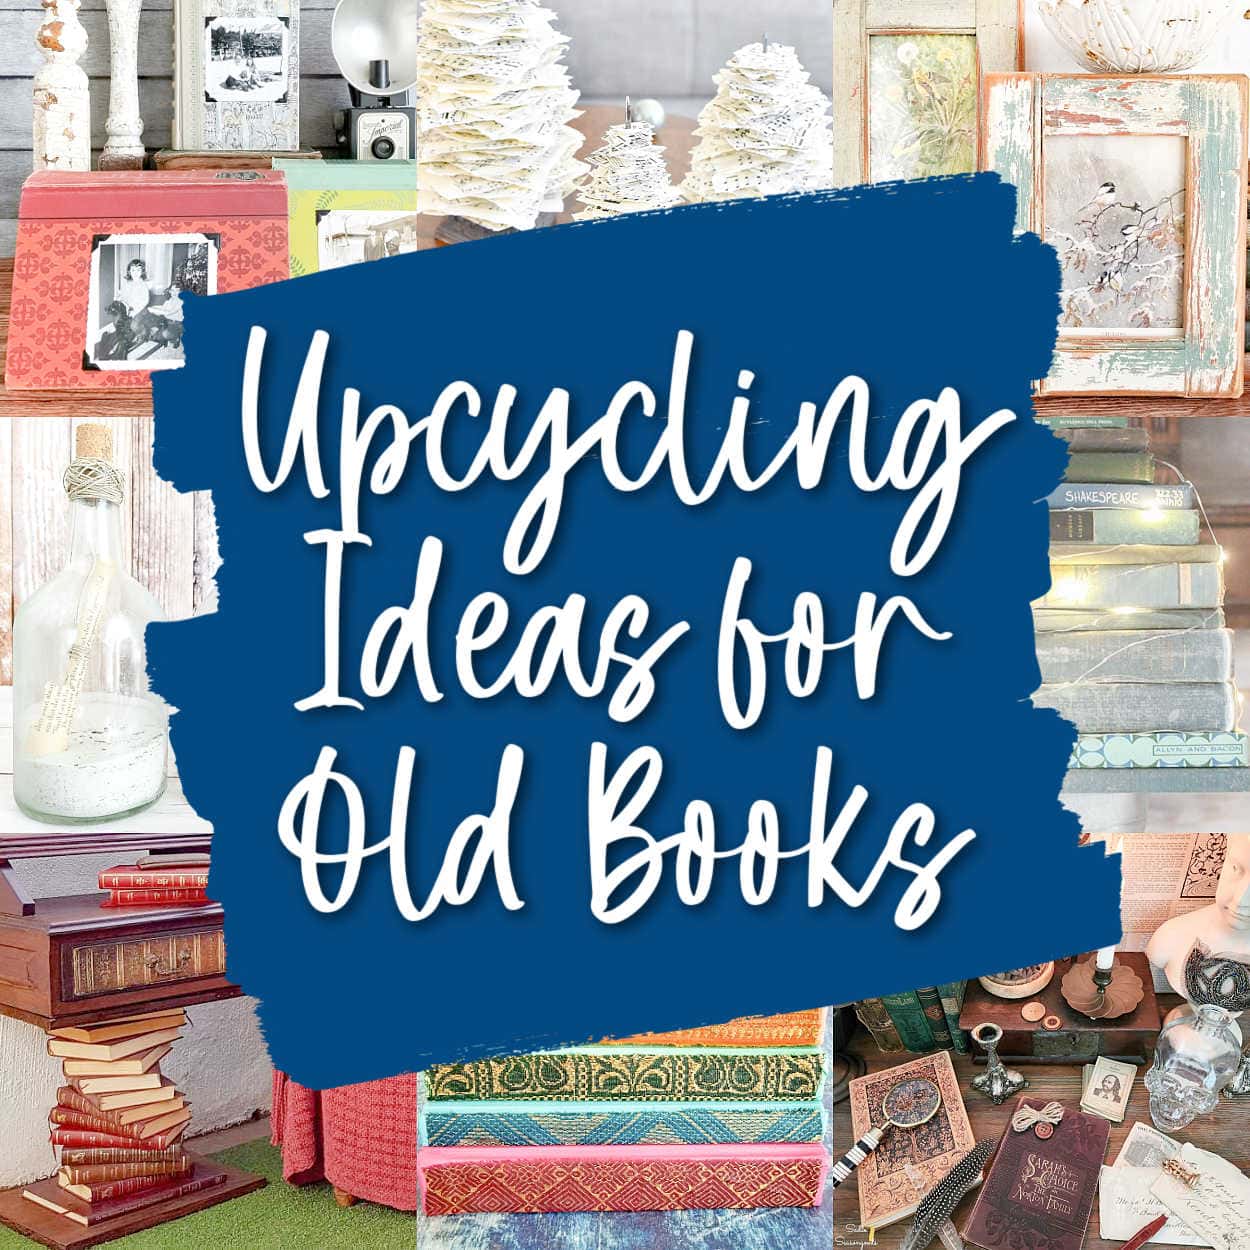 Upcycling Ideas for Old Books and Other Book Crafts